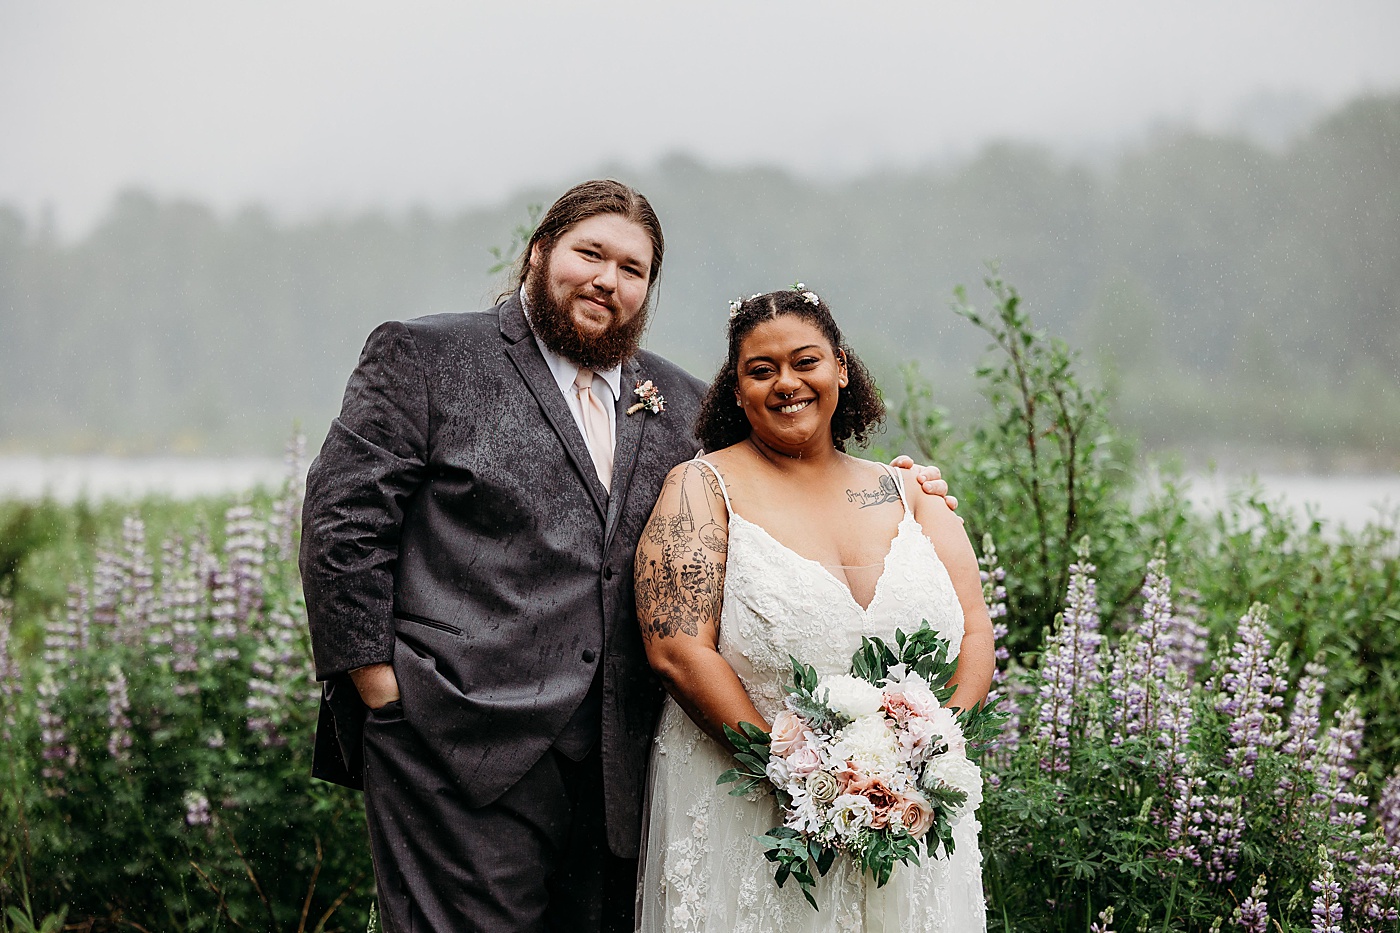 Bride and groom portraits in the rain during intimate elopement | Photo by Megan Montalvo Photography